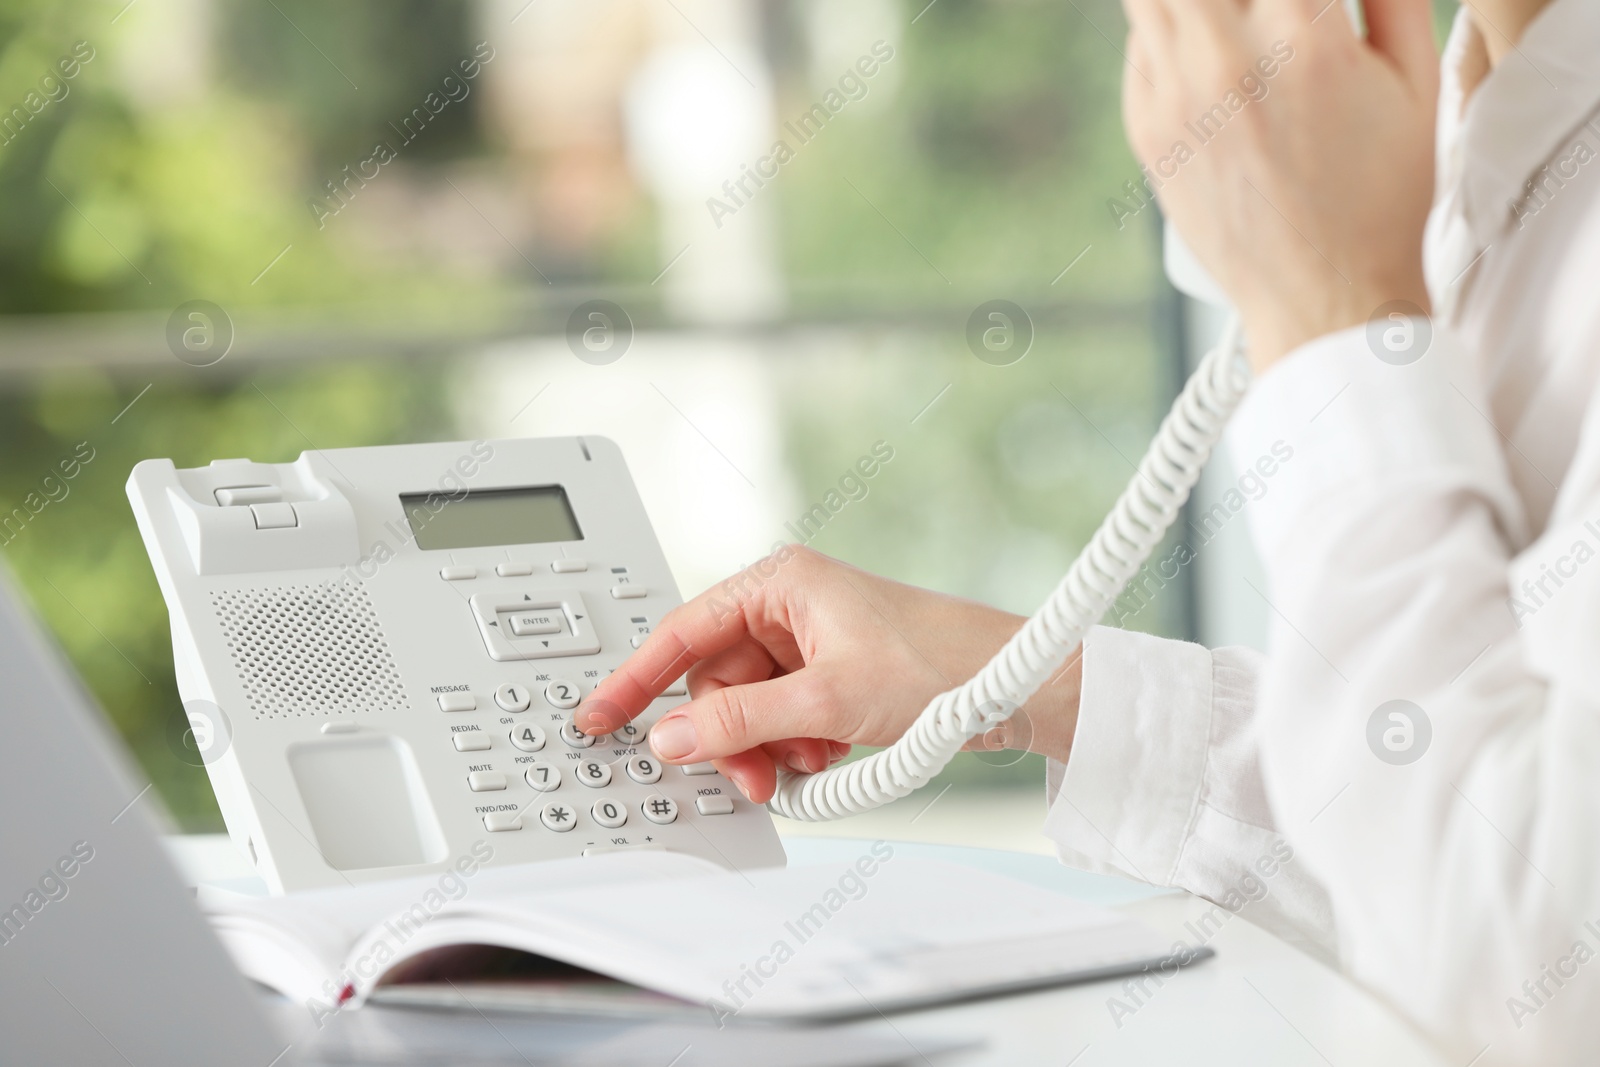 Photo of Assistant dialing number on telephone at table against blurred green background, closeup